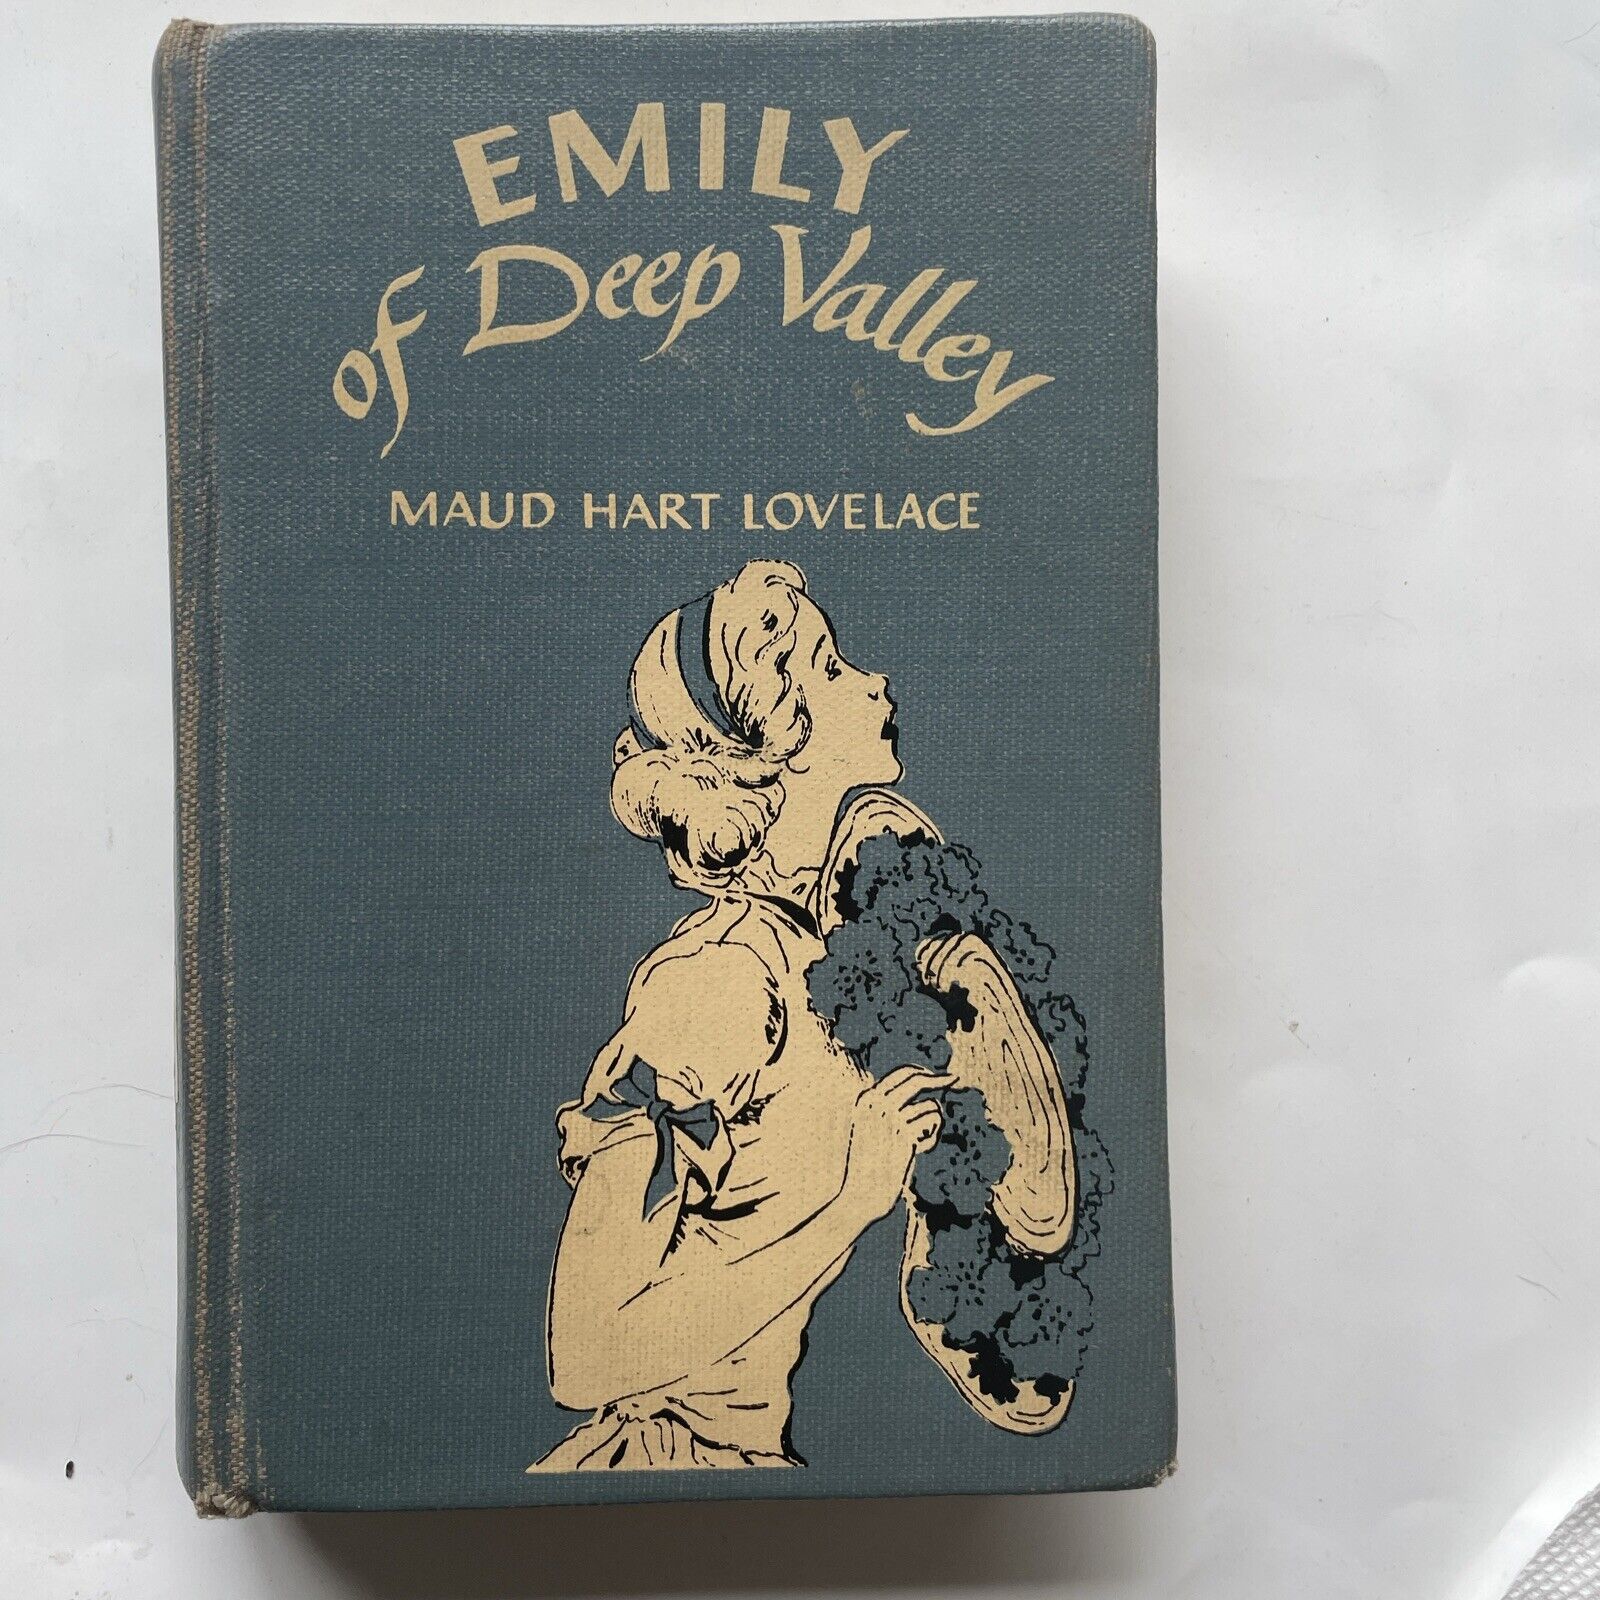 Emily Of Deep Valley by Maud Hart Lovelace - 1950, Ex-Library, ILLUS - Hardcover